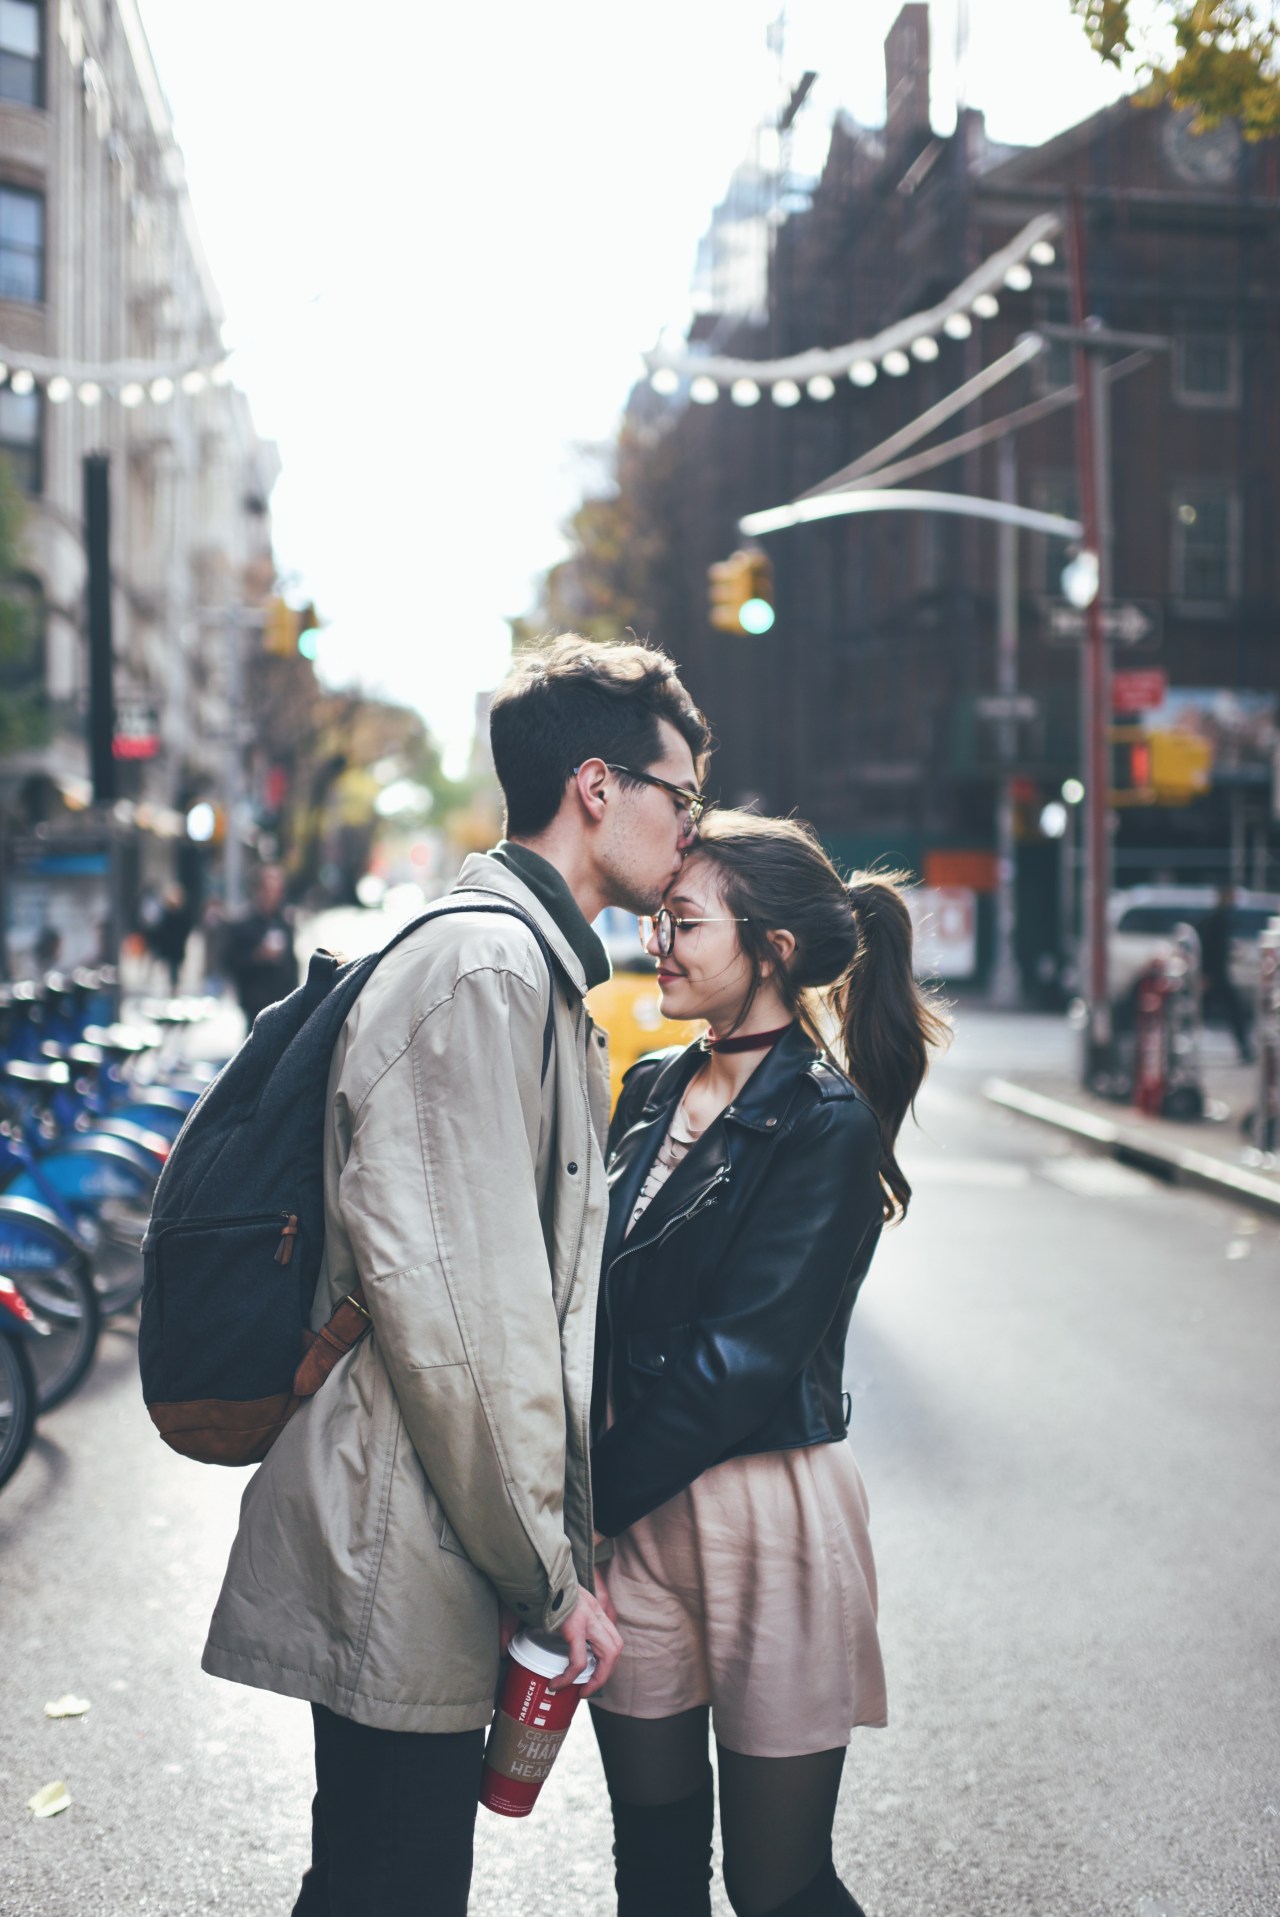 Girlfriends Ranked From Clingy To Independent Based On Their Zodiac Sign — photo of gf and boyfriend